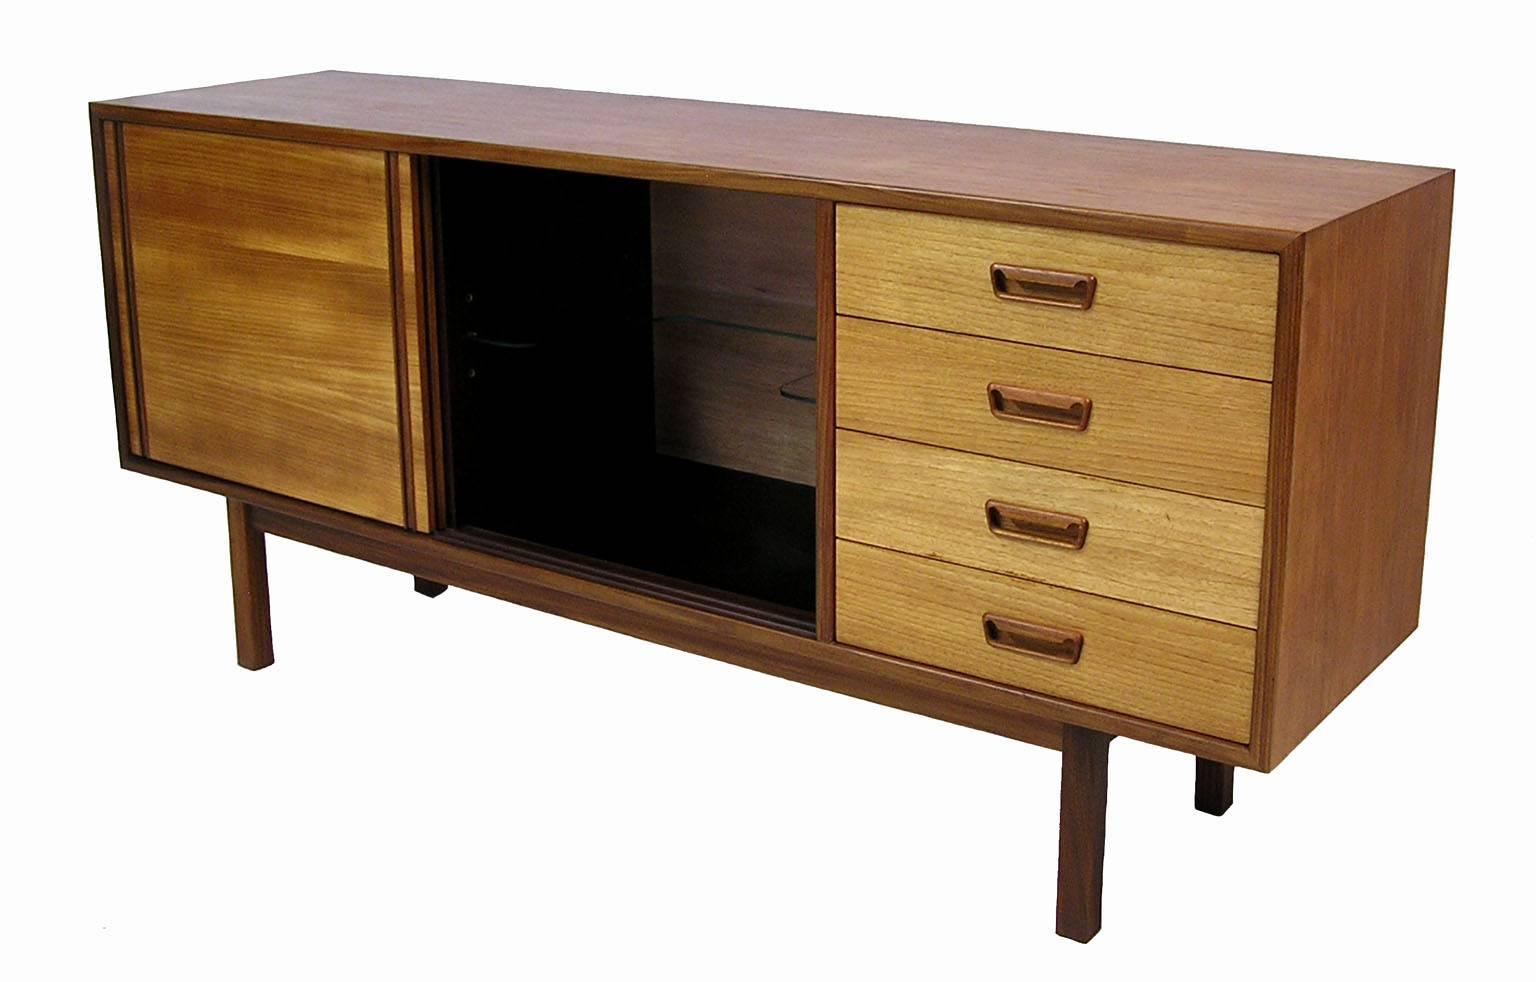 A gorgeous low teak sideboard from the 1960s Danish modern inspired era by RS Associates of Canada. Stylish clean lines with a contrasting tone and beautifully sculpted pulls. Features a center bar style compartment with a black laminate bottom and